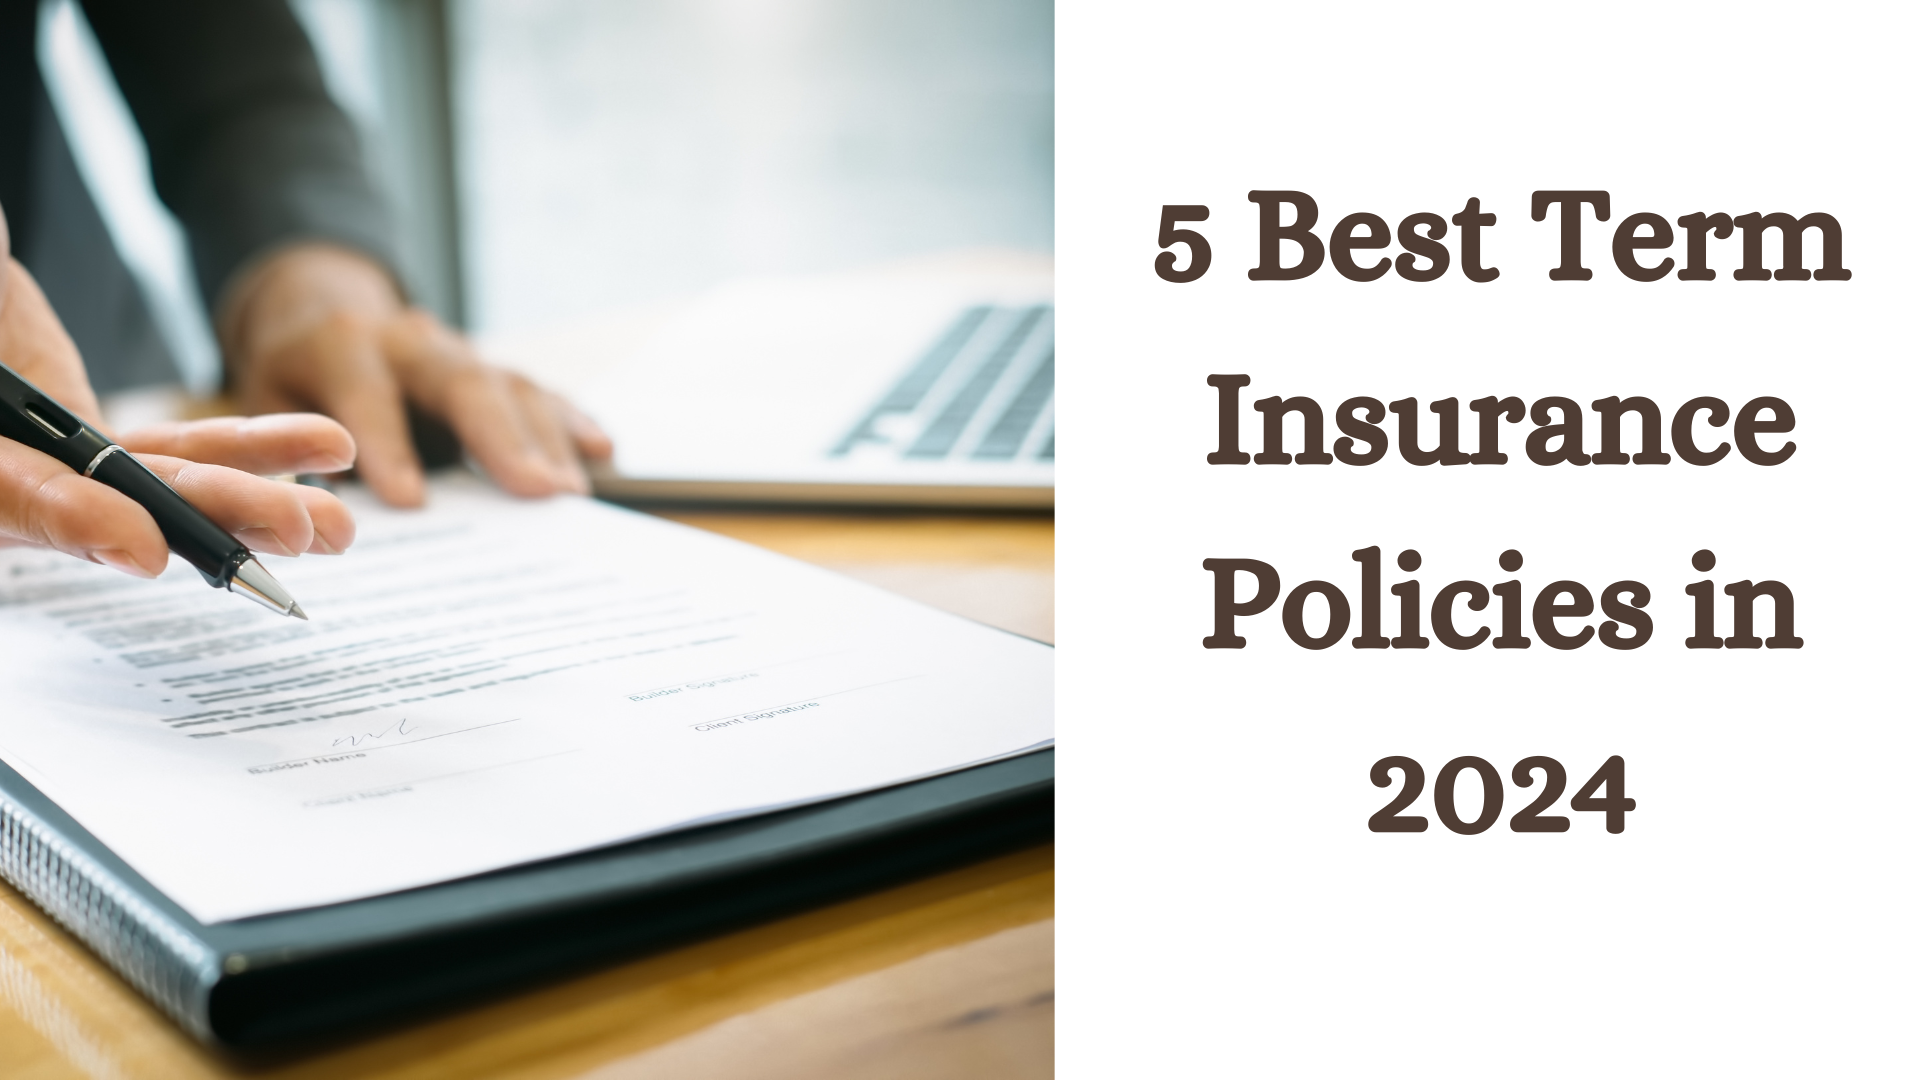 5 Best Term Insurance Policies in 2024